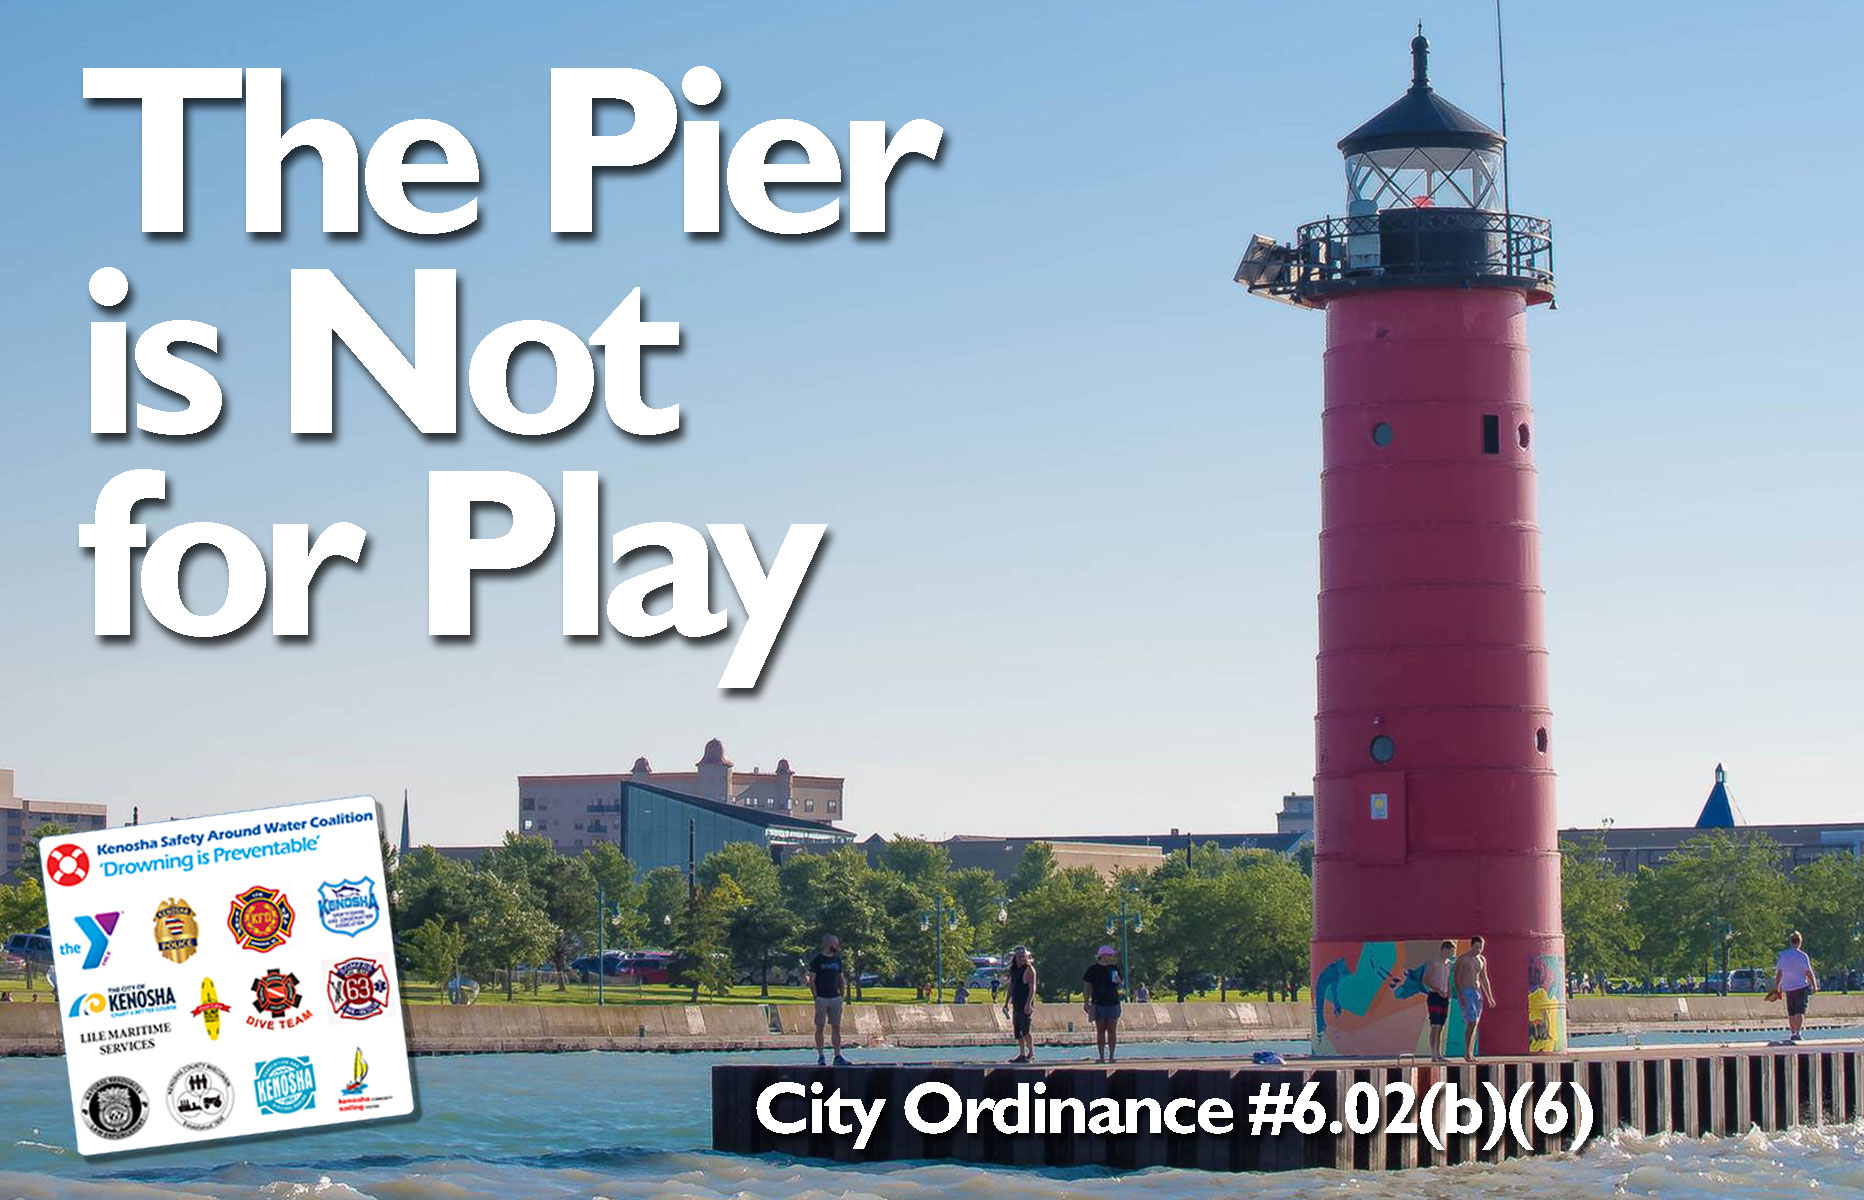 Red lighthouse at the end of the pier in Lake Michigan saying "The Pier is Not for Play"